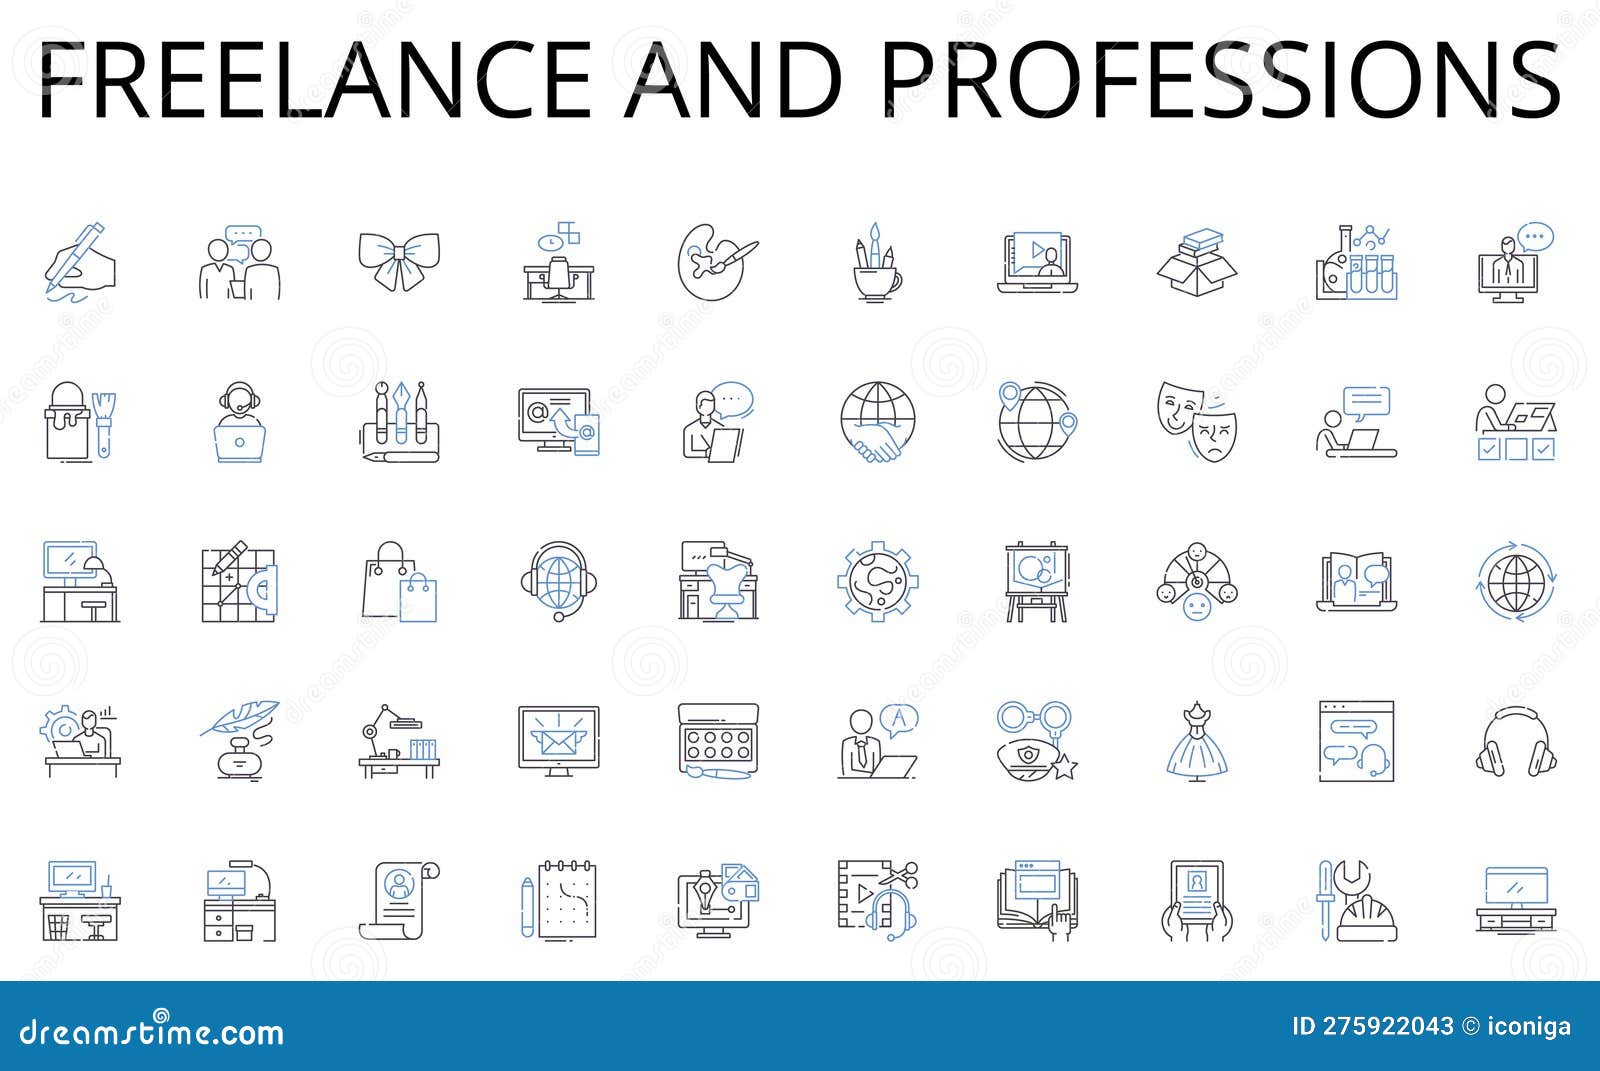 freelance and professions line icons collection. mastery, proficiency, expertness, adeptness, skillfulness, finesse